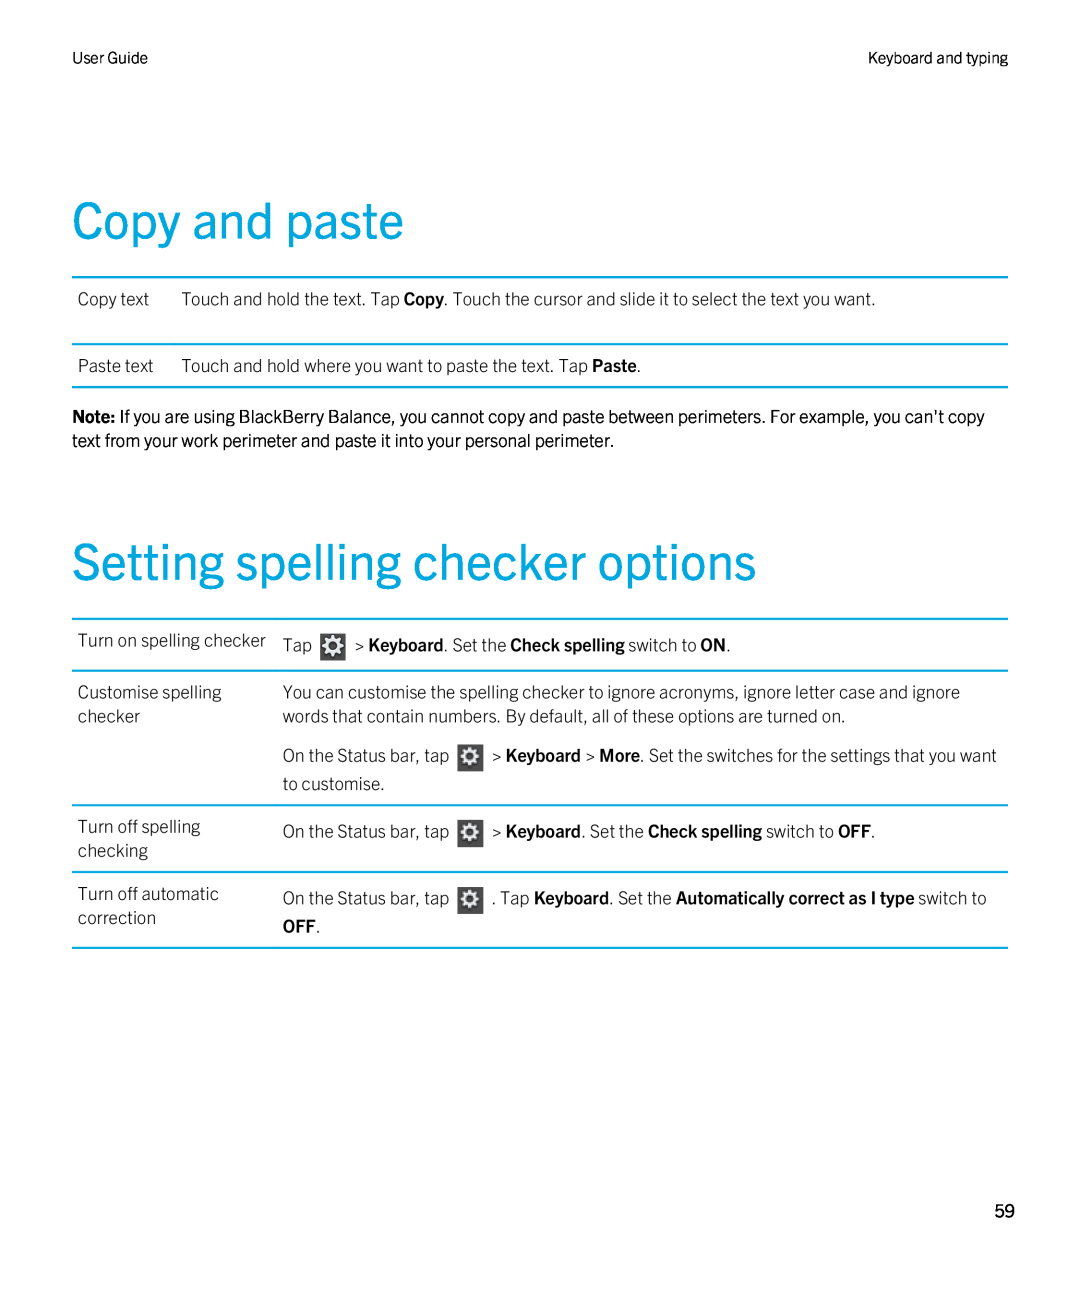 Blackberry 2.0.1 manual Copy and paste, Setting spelling checker options, Keyboard. Set the Check spelling switch to ON 